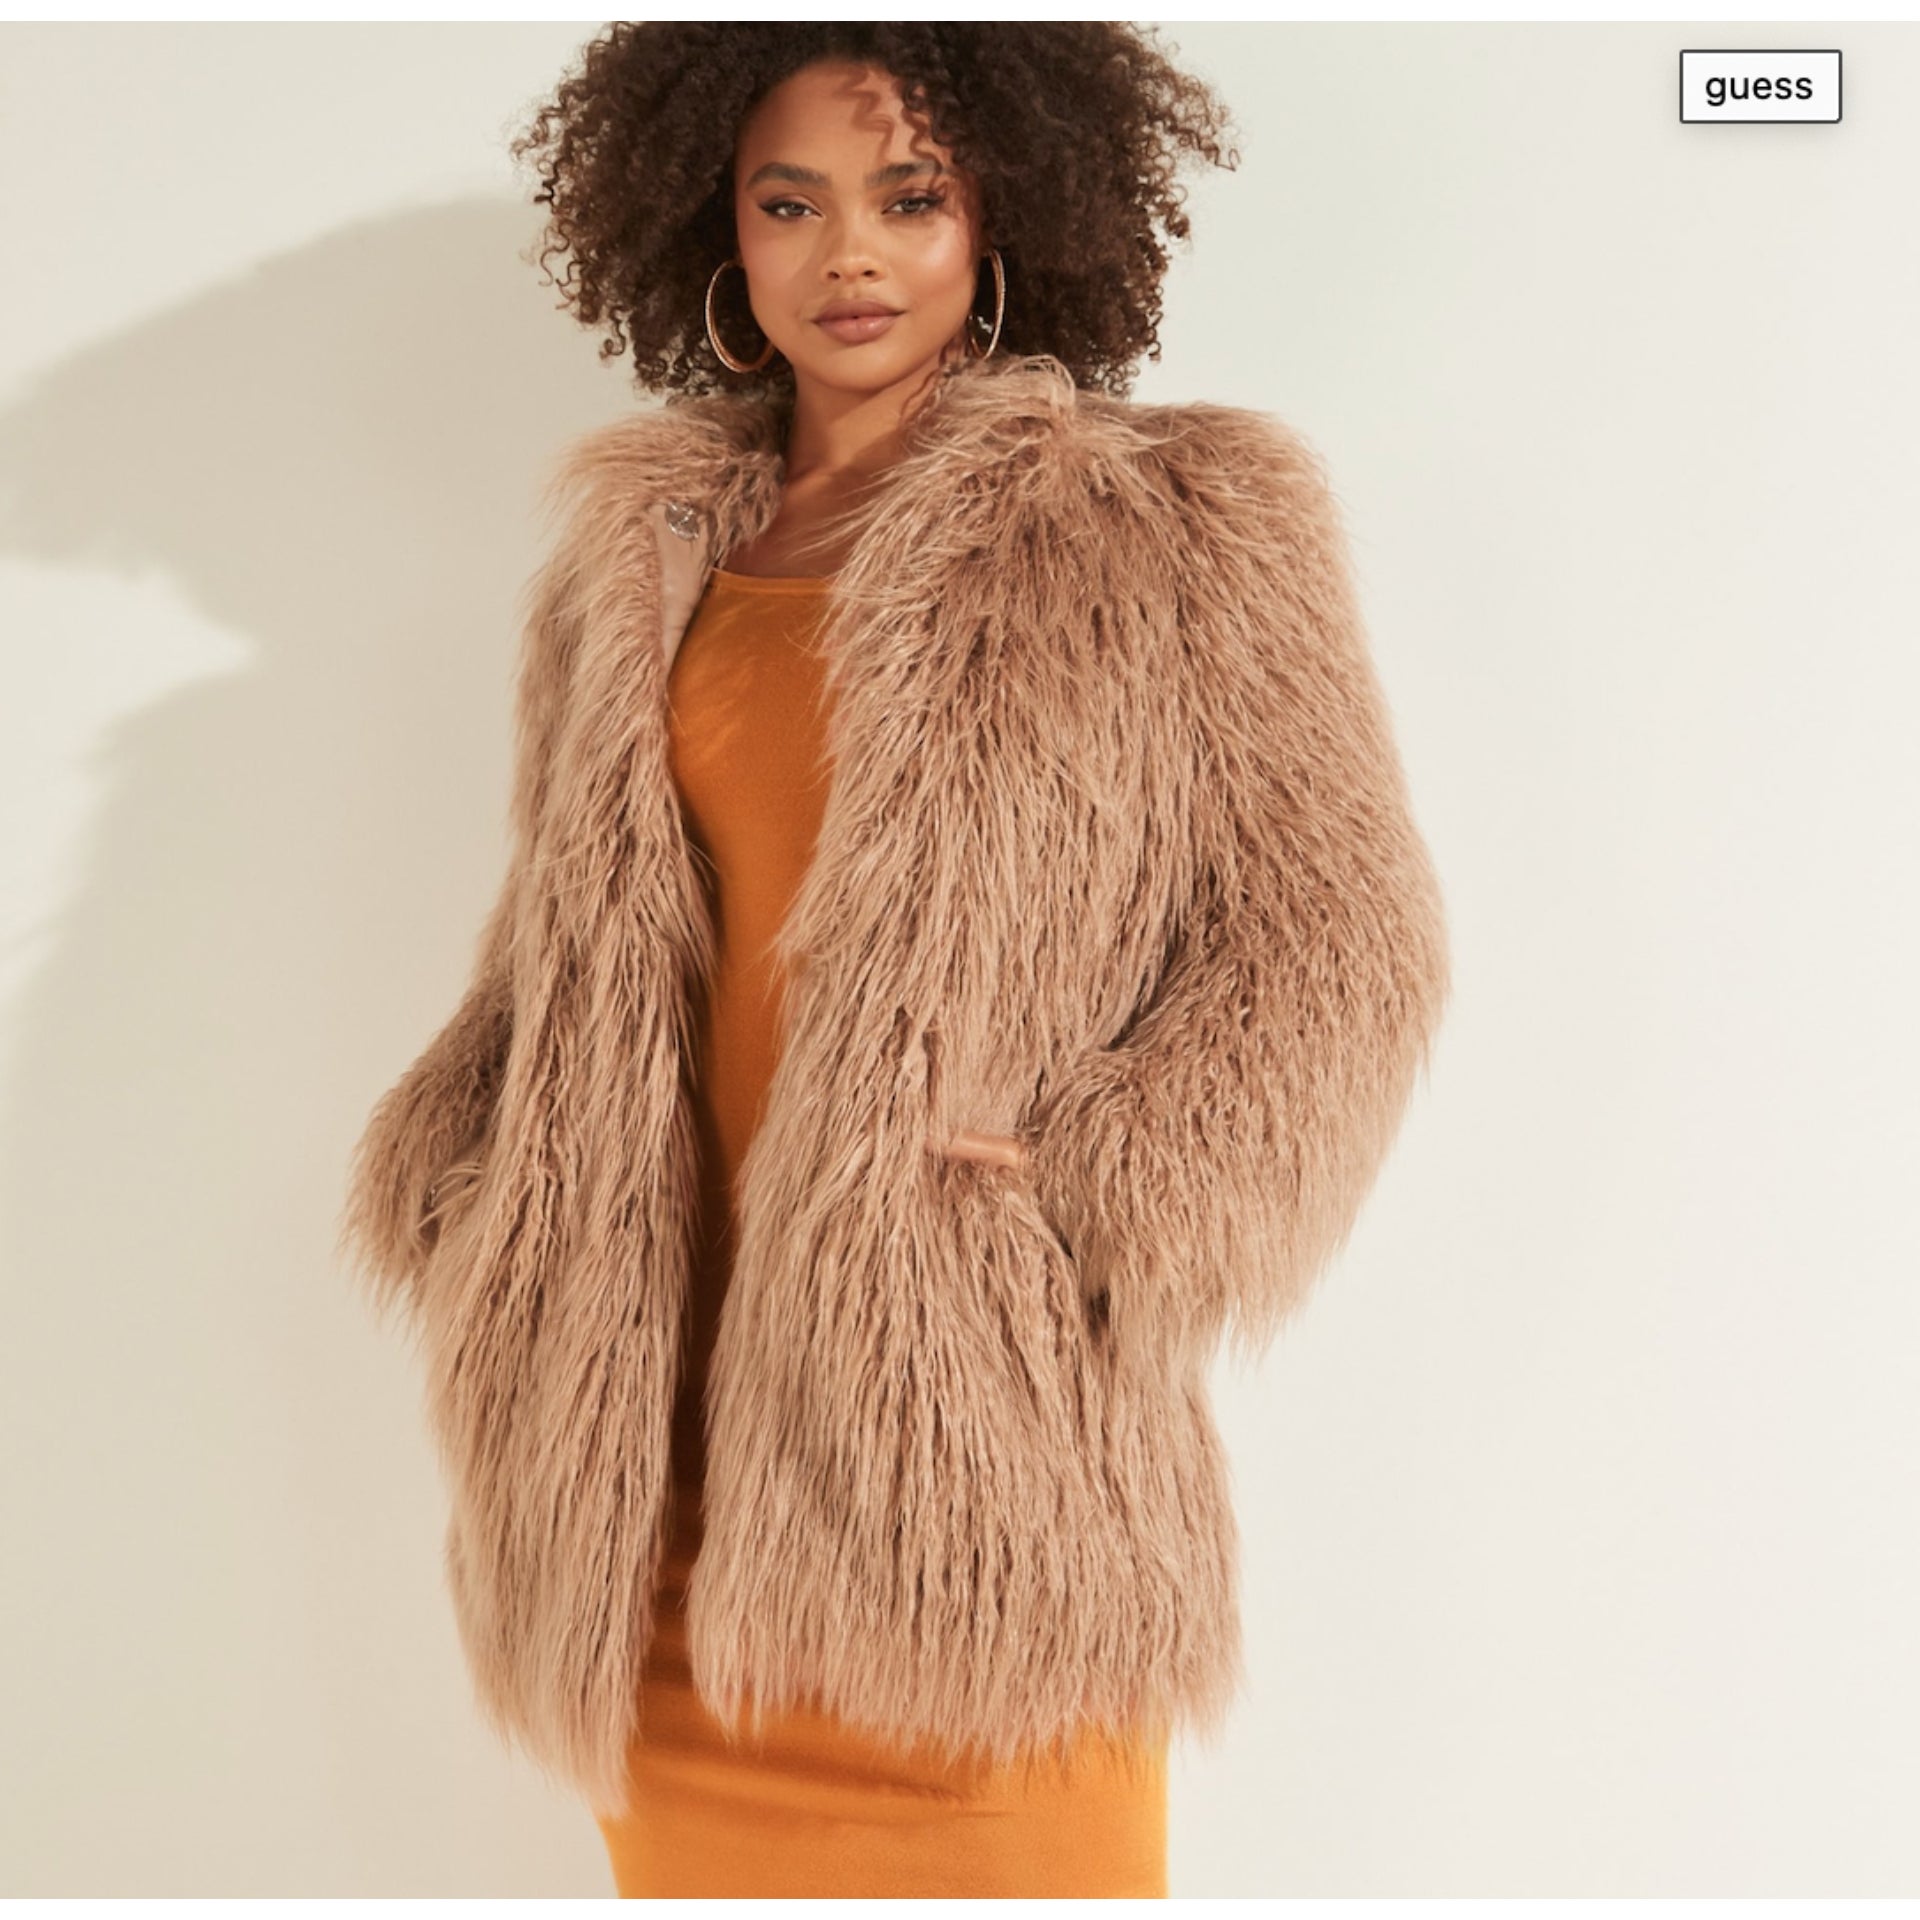 10 Fall Jackets On Sale For Black Friday And Cyber Monday | Essence